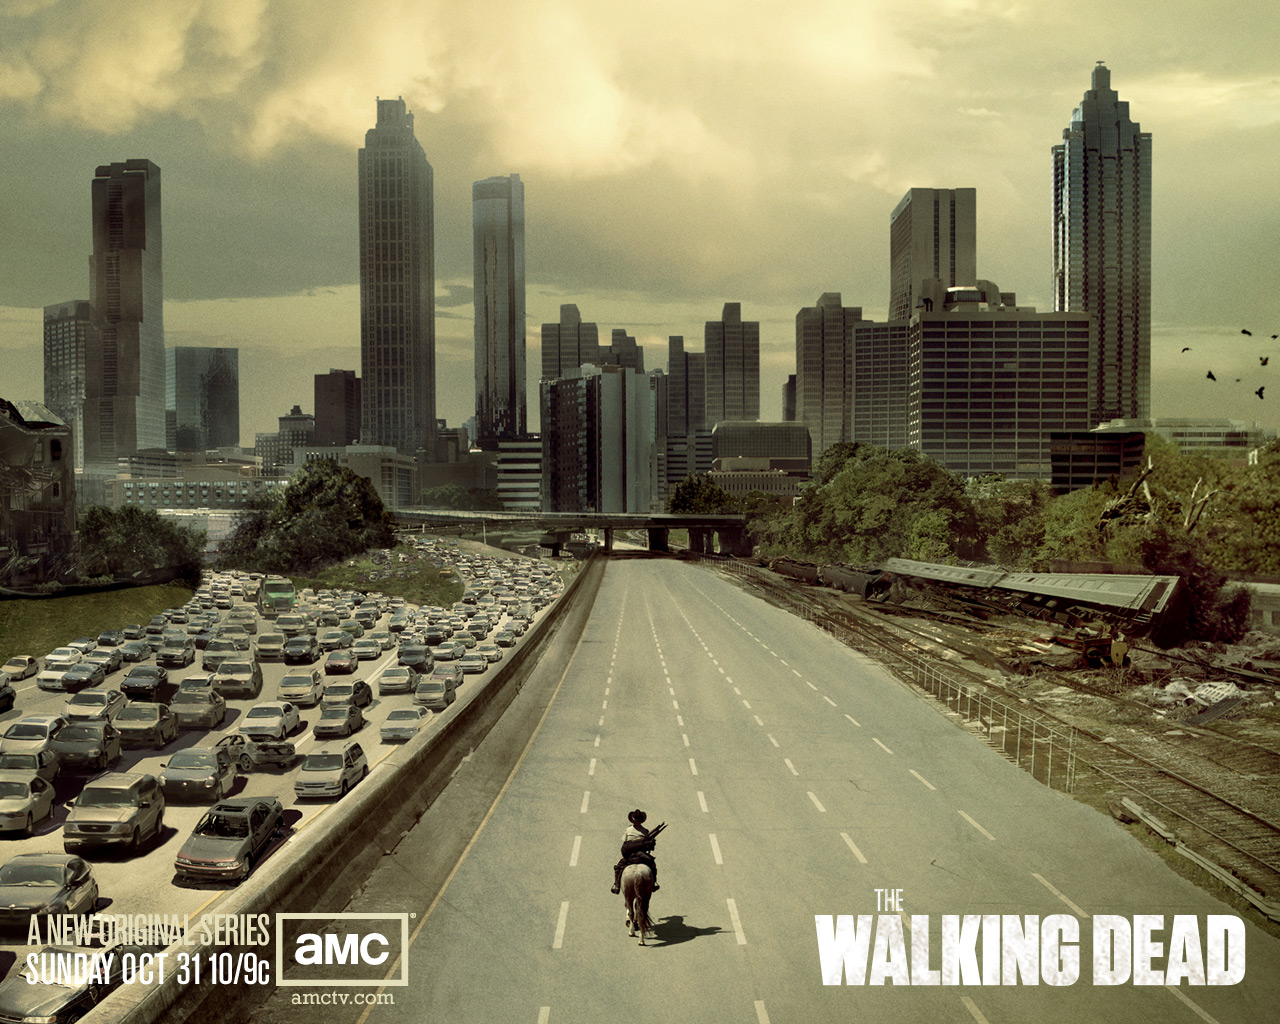 Download High quality The Walking Dead wallpaper / Movies / 1280x1024